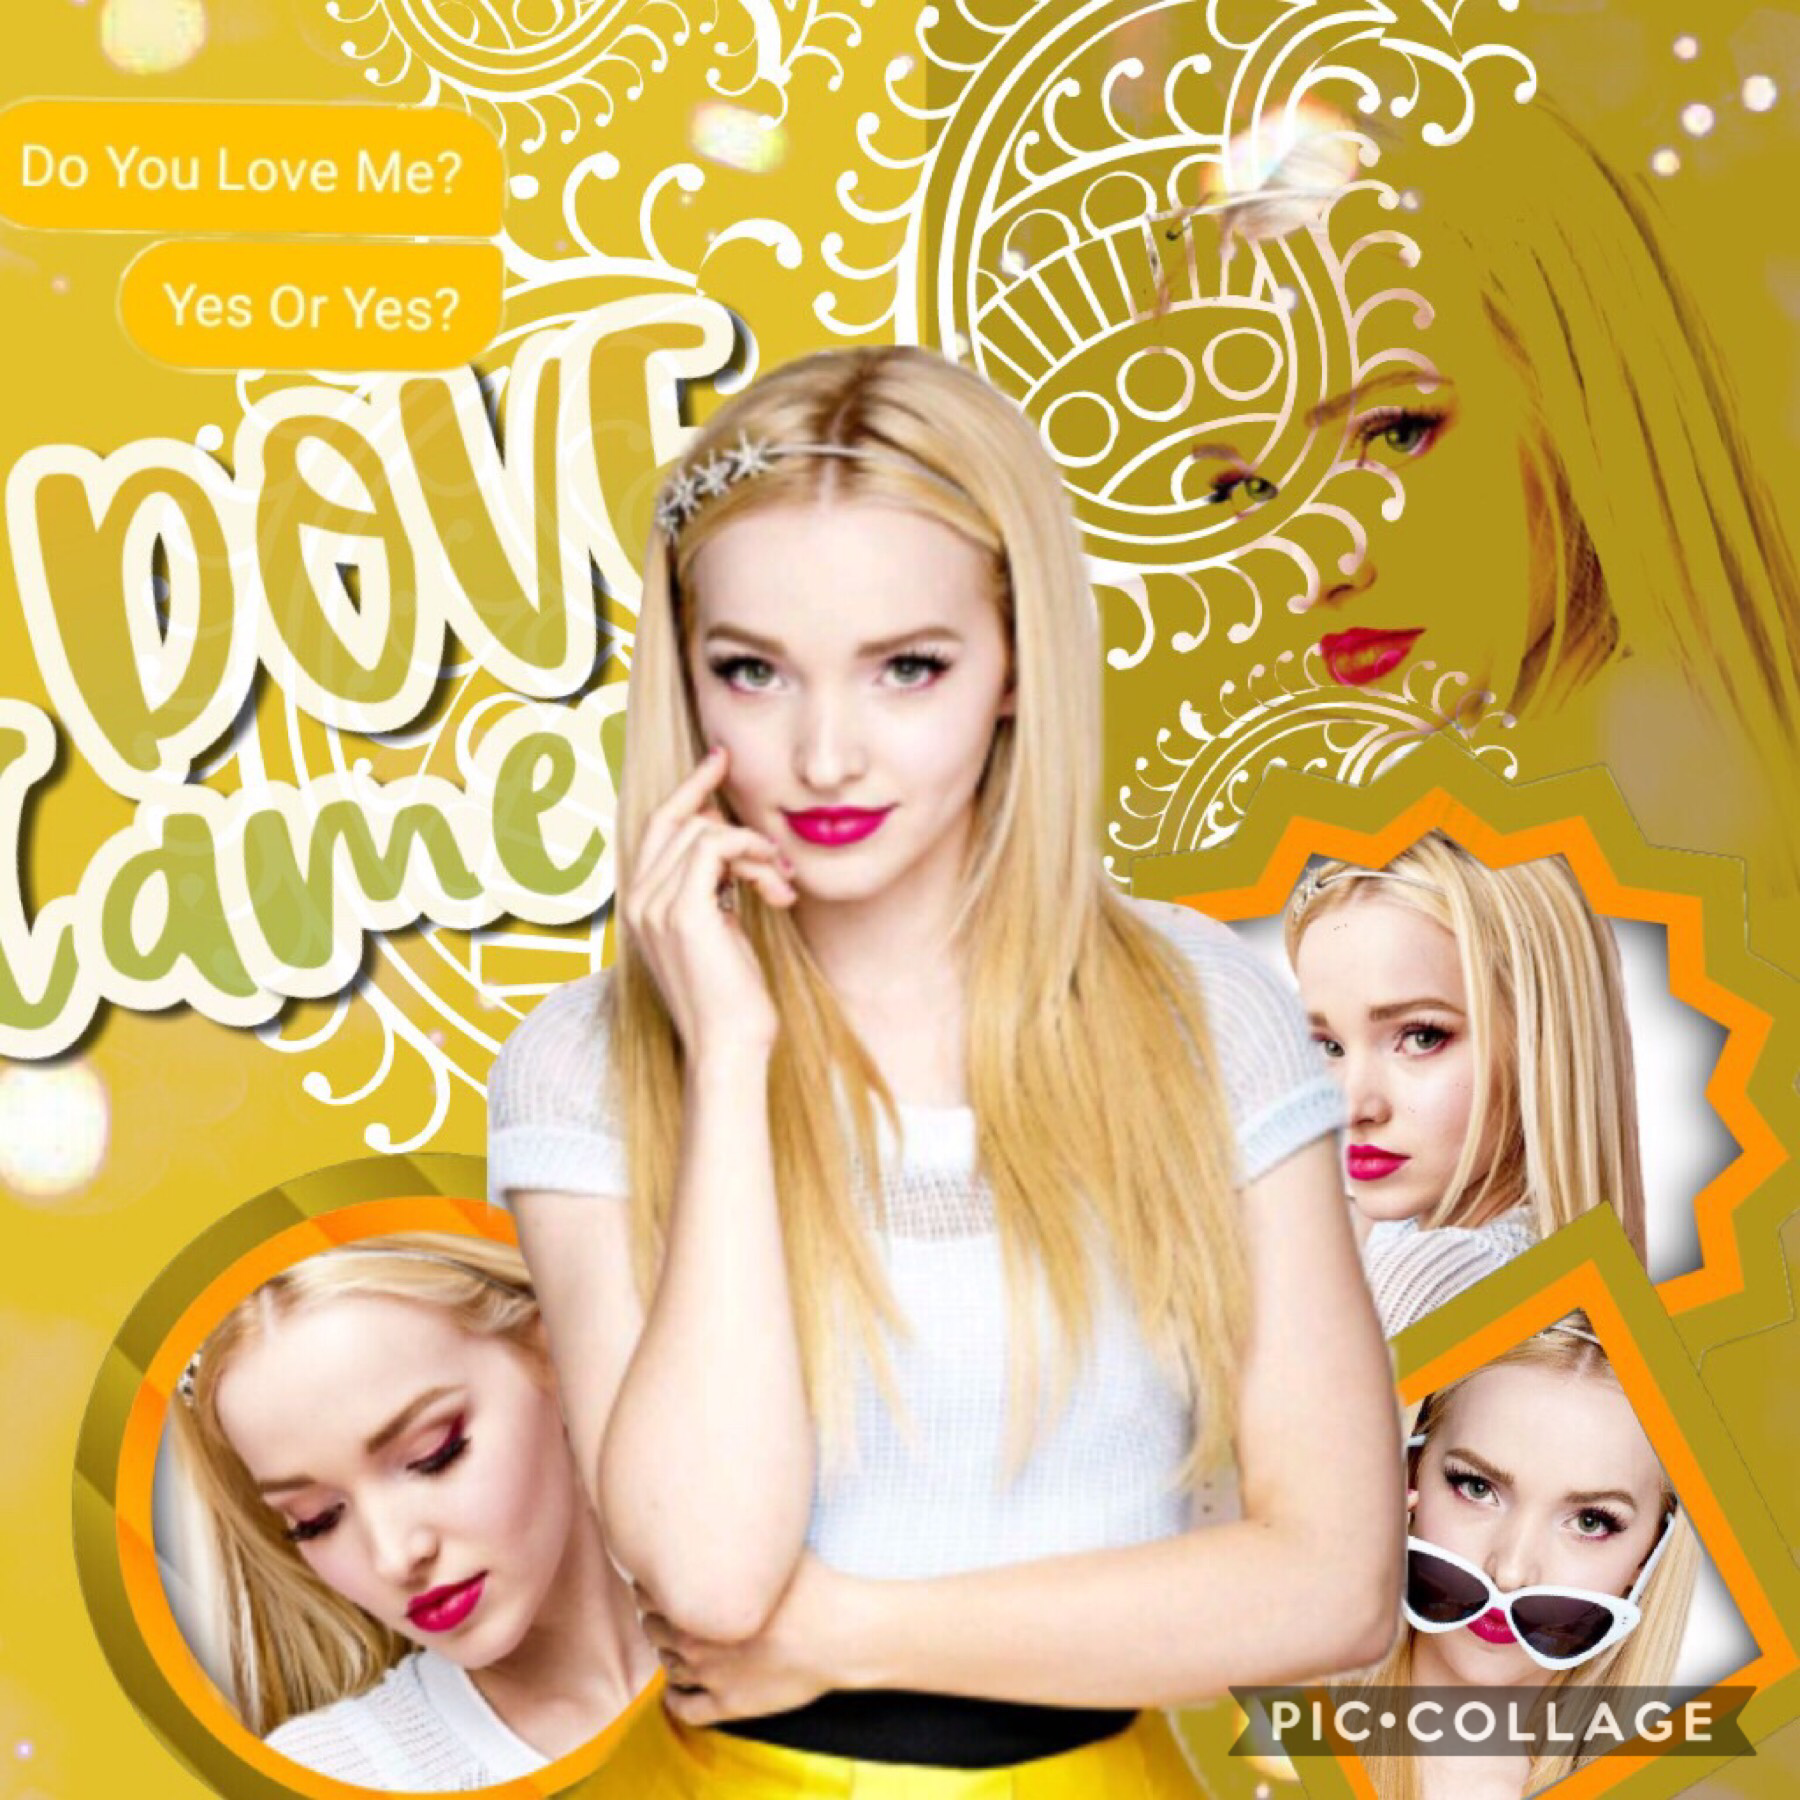 💛Tap💛

Yellow Dove Cameron edit!!!
I have some edits that I have already made that I am going to post soon but I need more ideas on people I can make edits on!!!💛💛💛